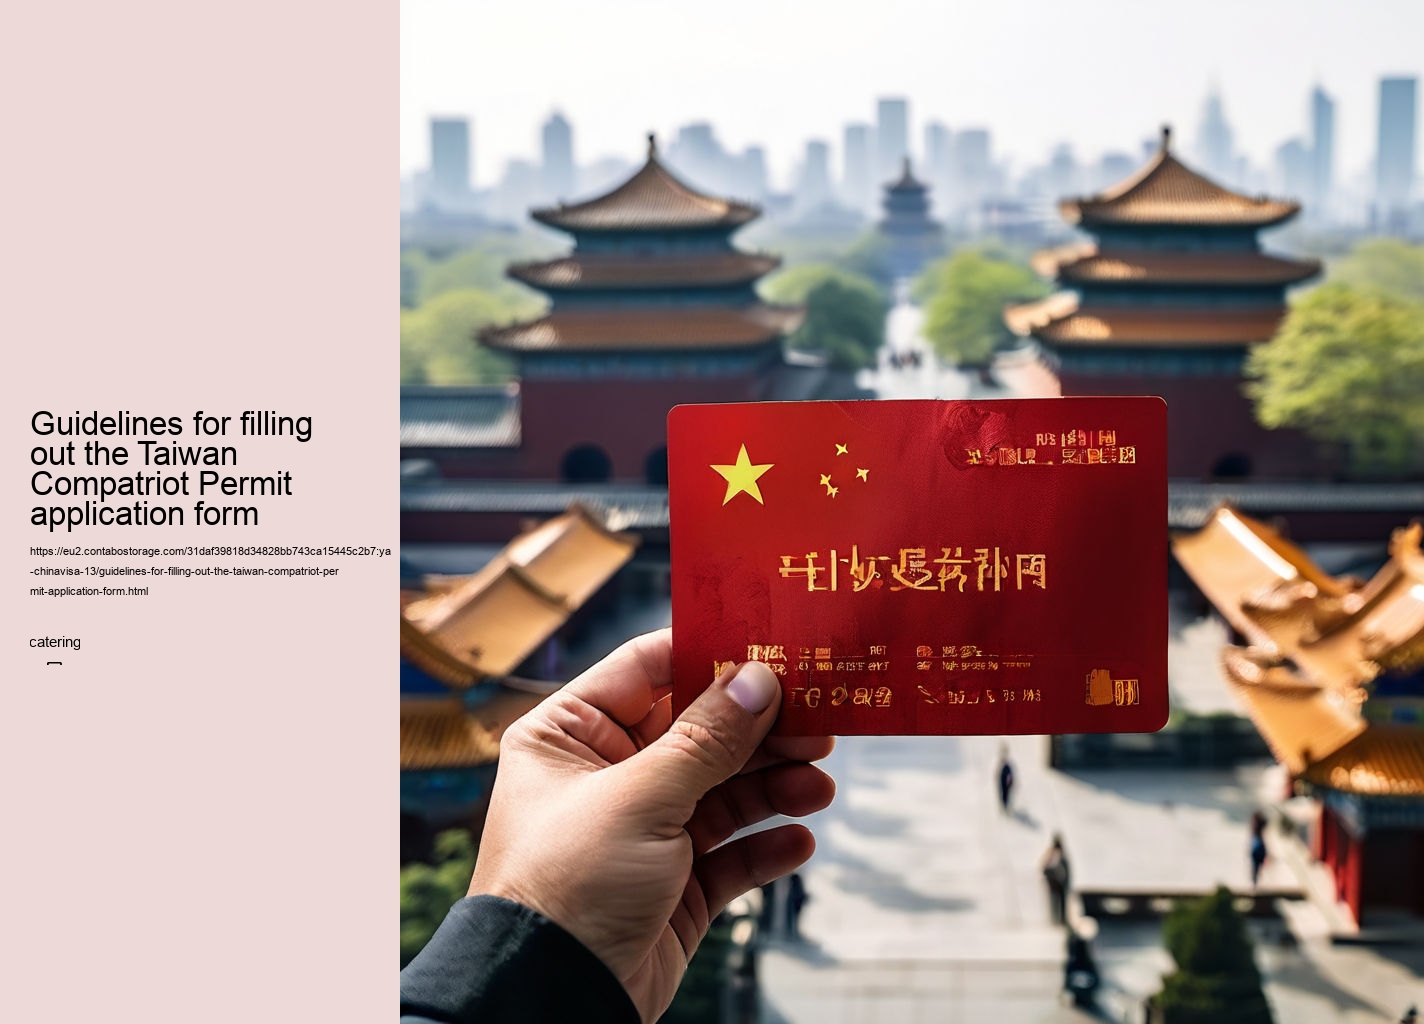 Guidelines for filling out the Taiwan Compatriot Permit application form